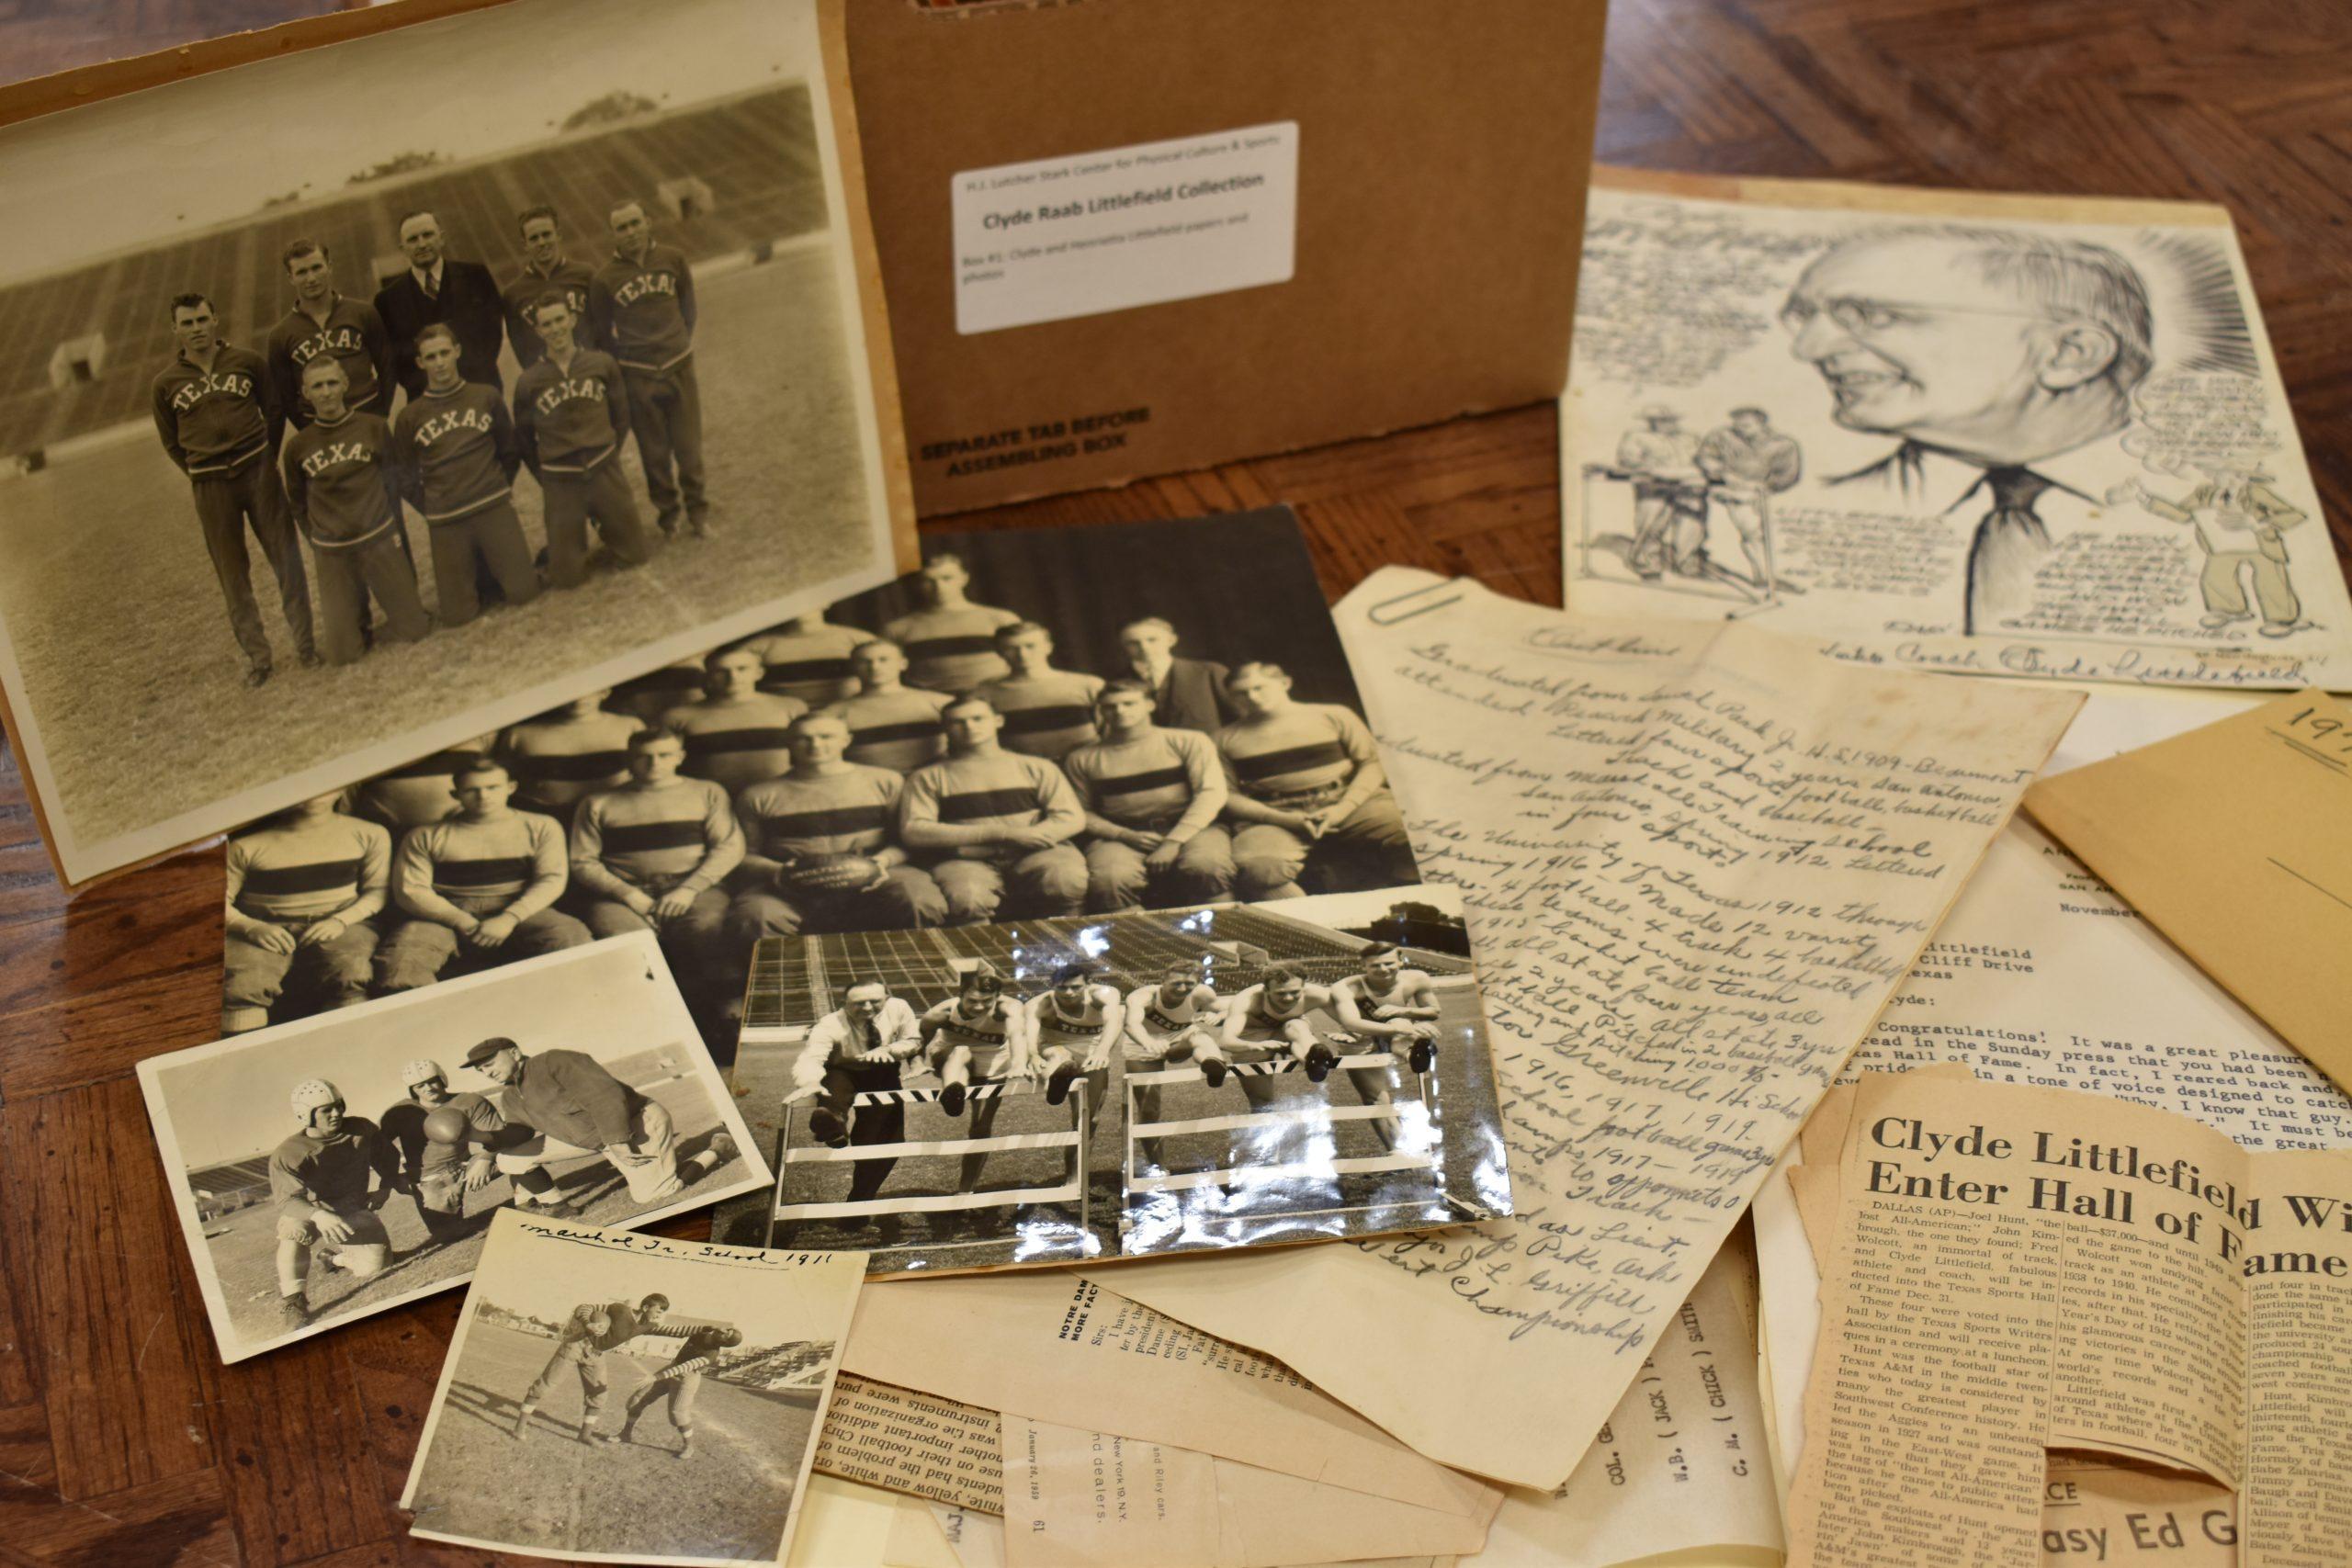 Papers and photos from Clyde Littlefield's collection